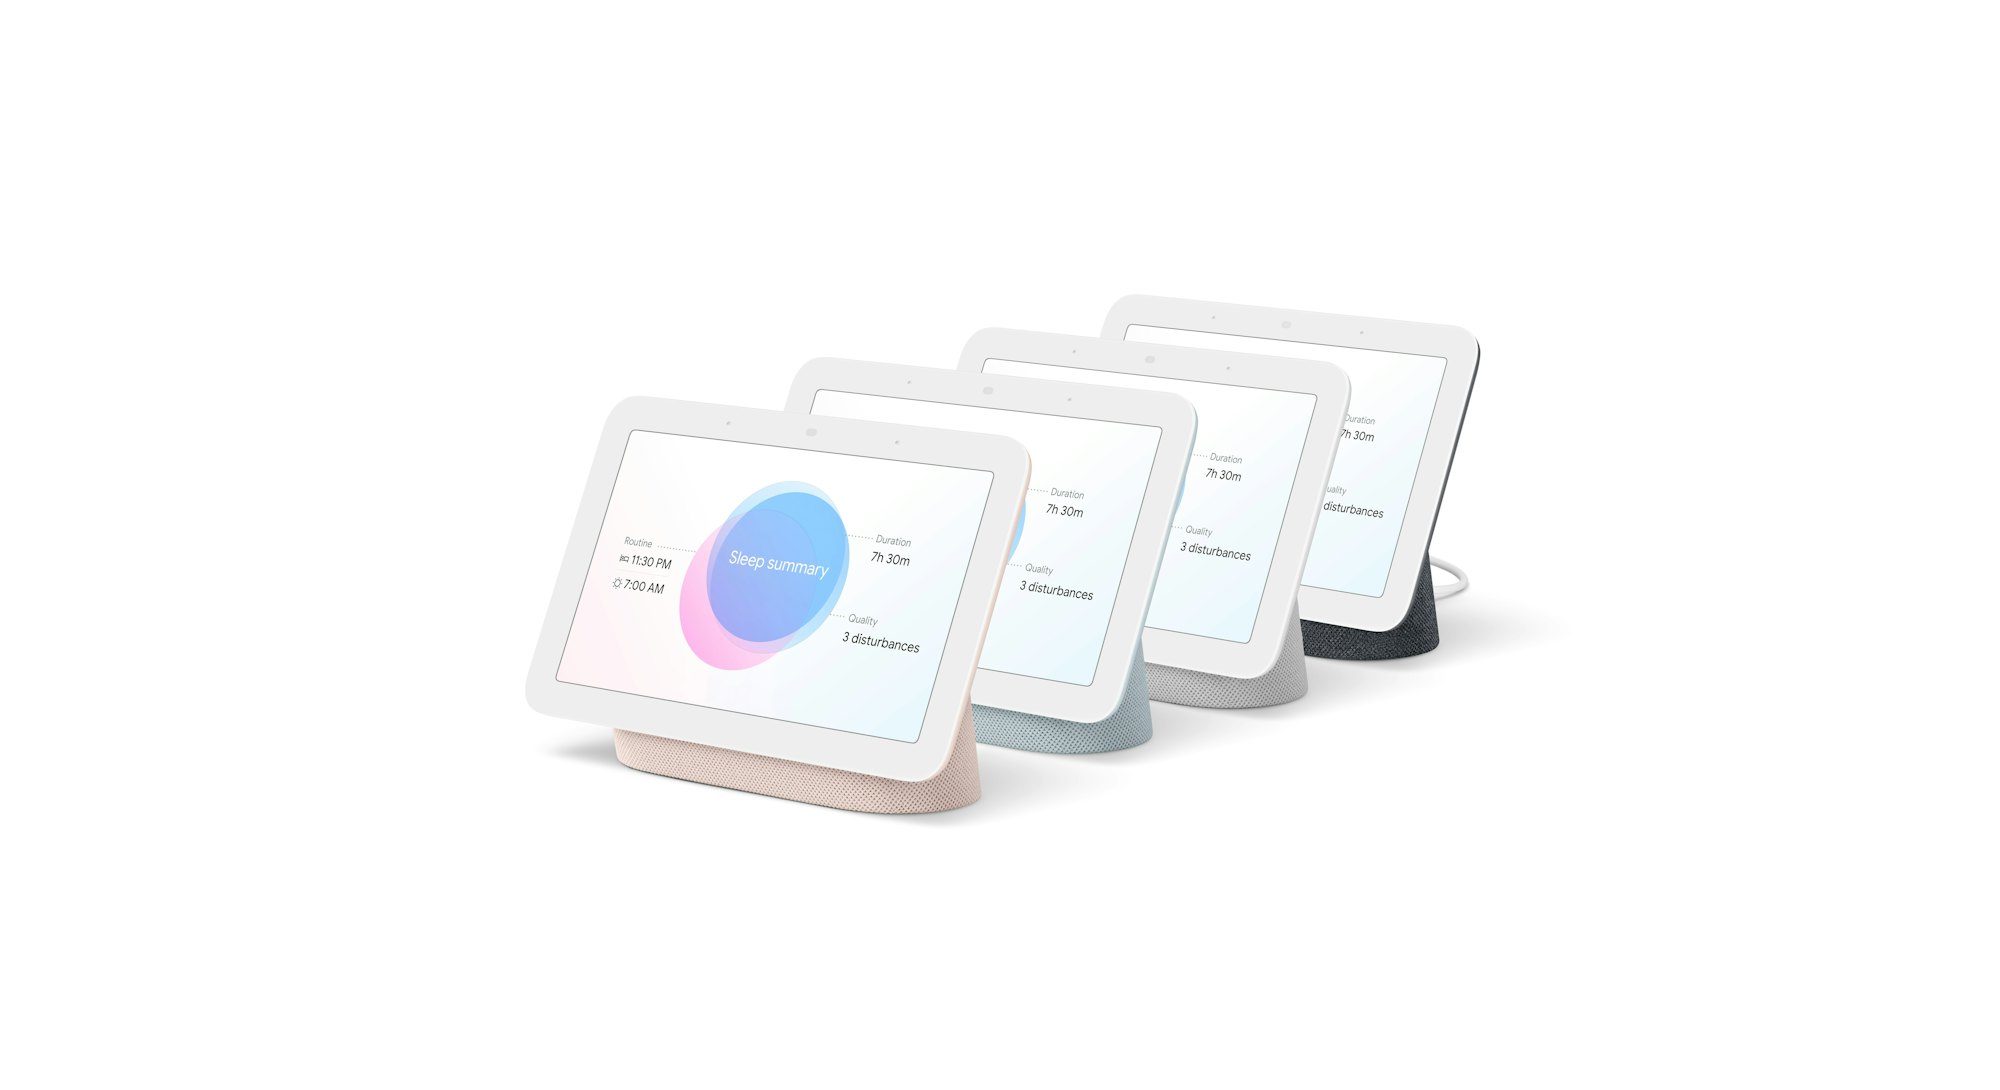 Google Nest Hub 2 in four different colors